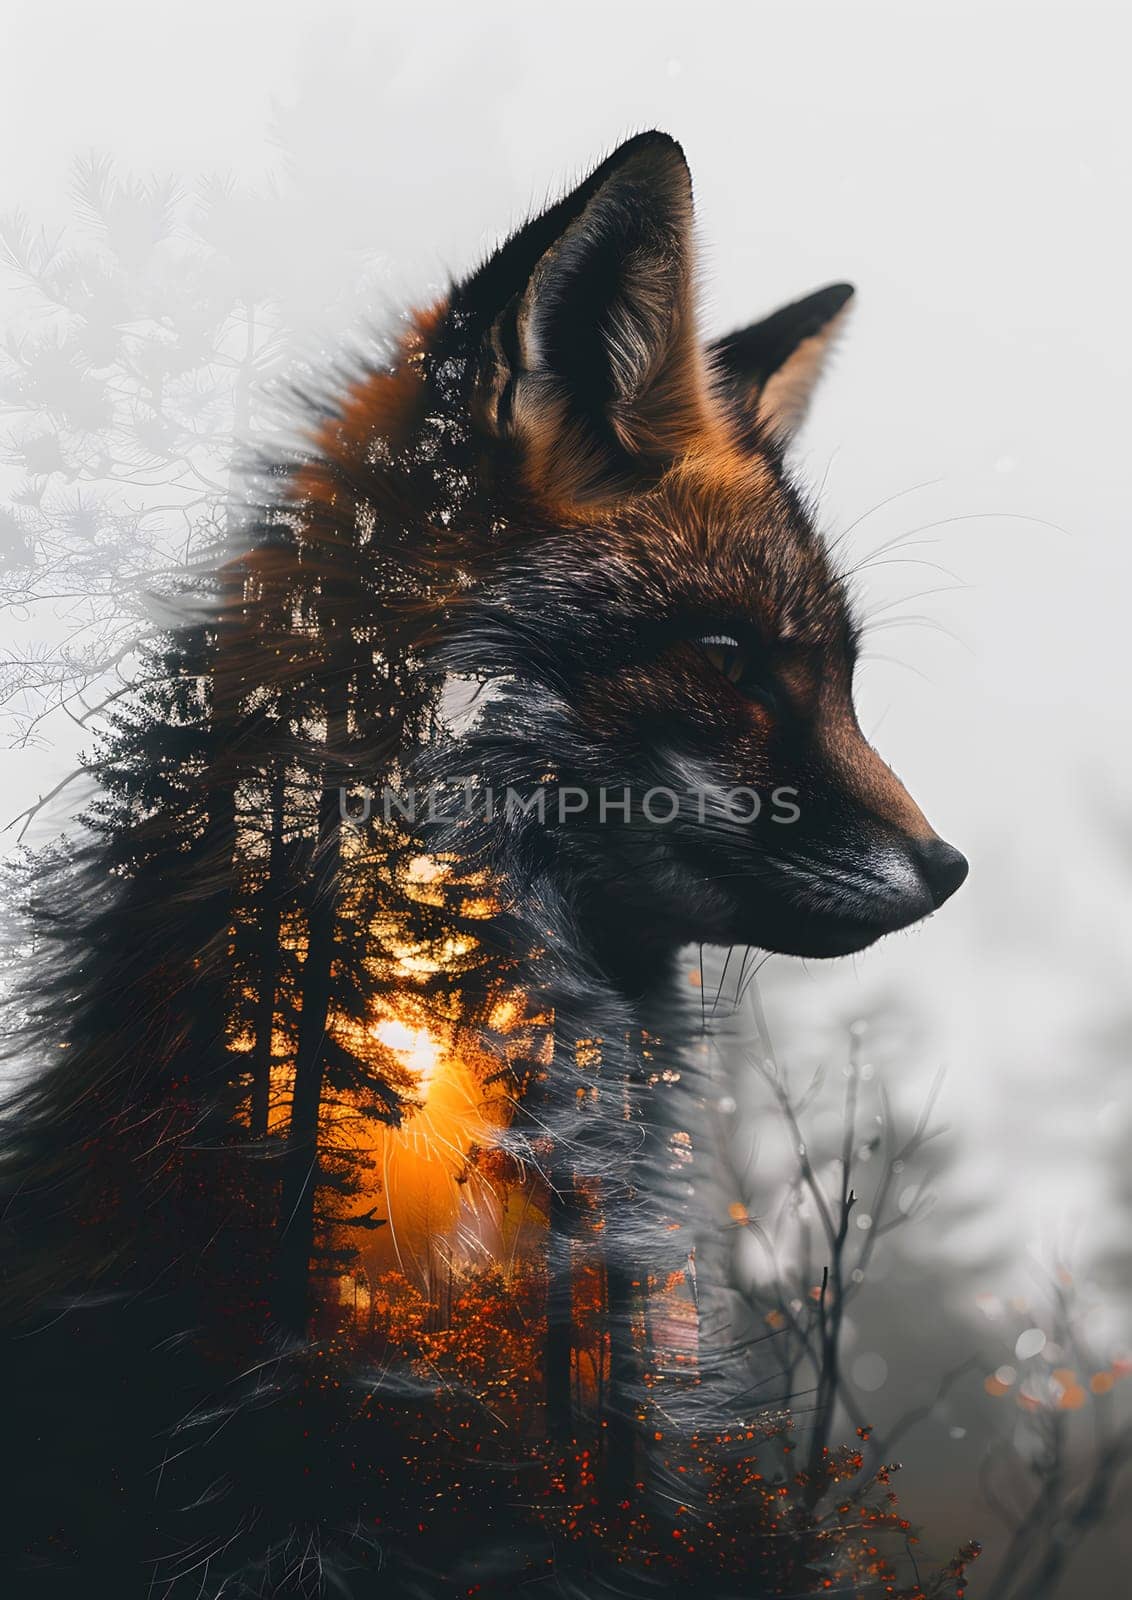 Double exposure image of a German shepherd dog in a forest environment by Nadtochiy